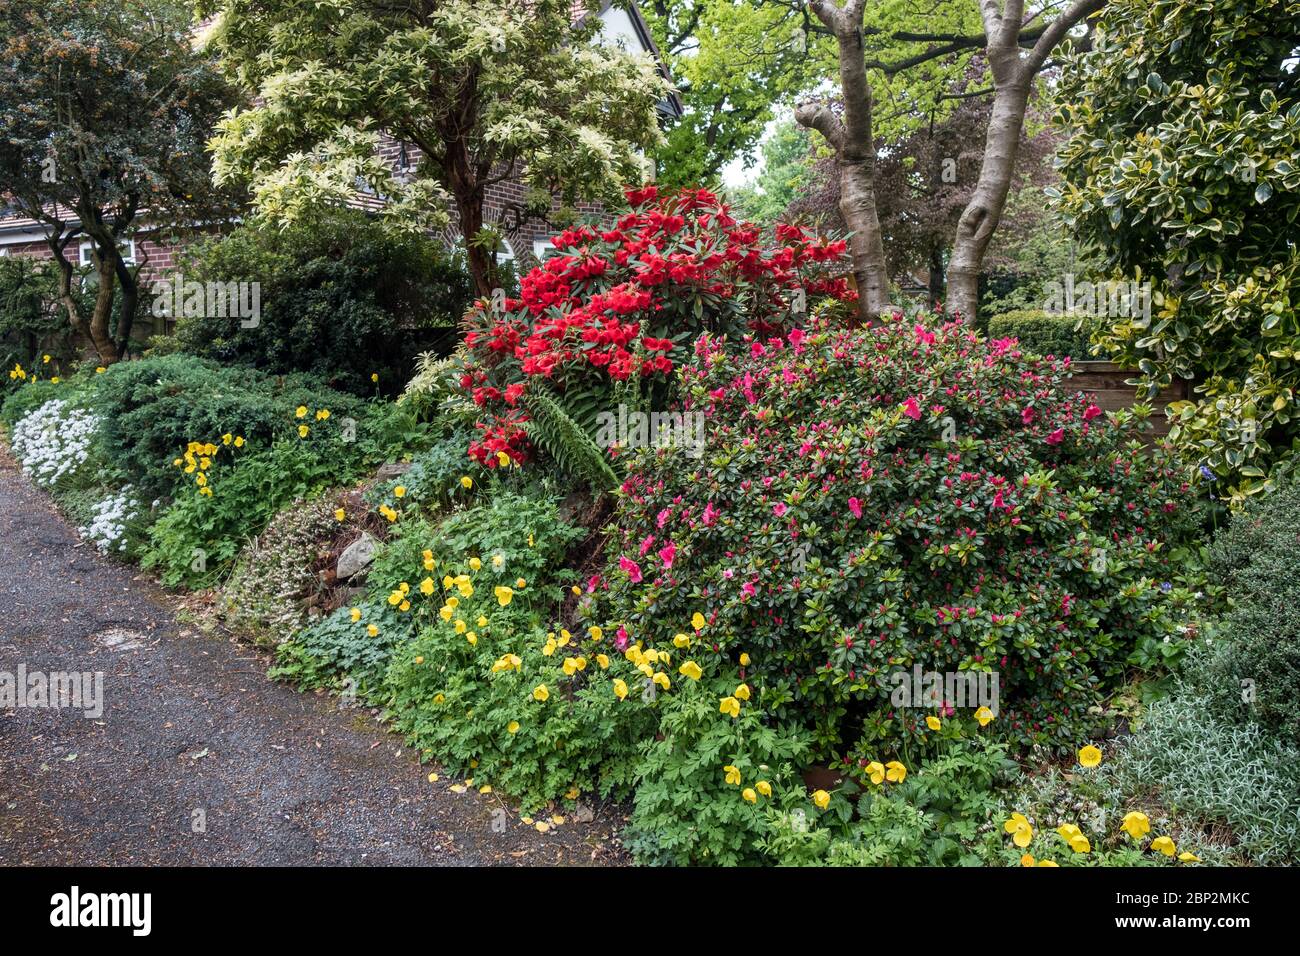 Red rhododendron and pink azalea in flower in spring in front garden of house, UK Stock Photo